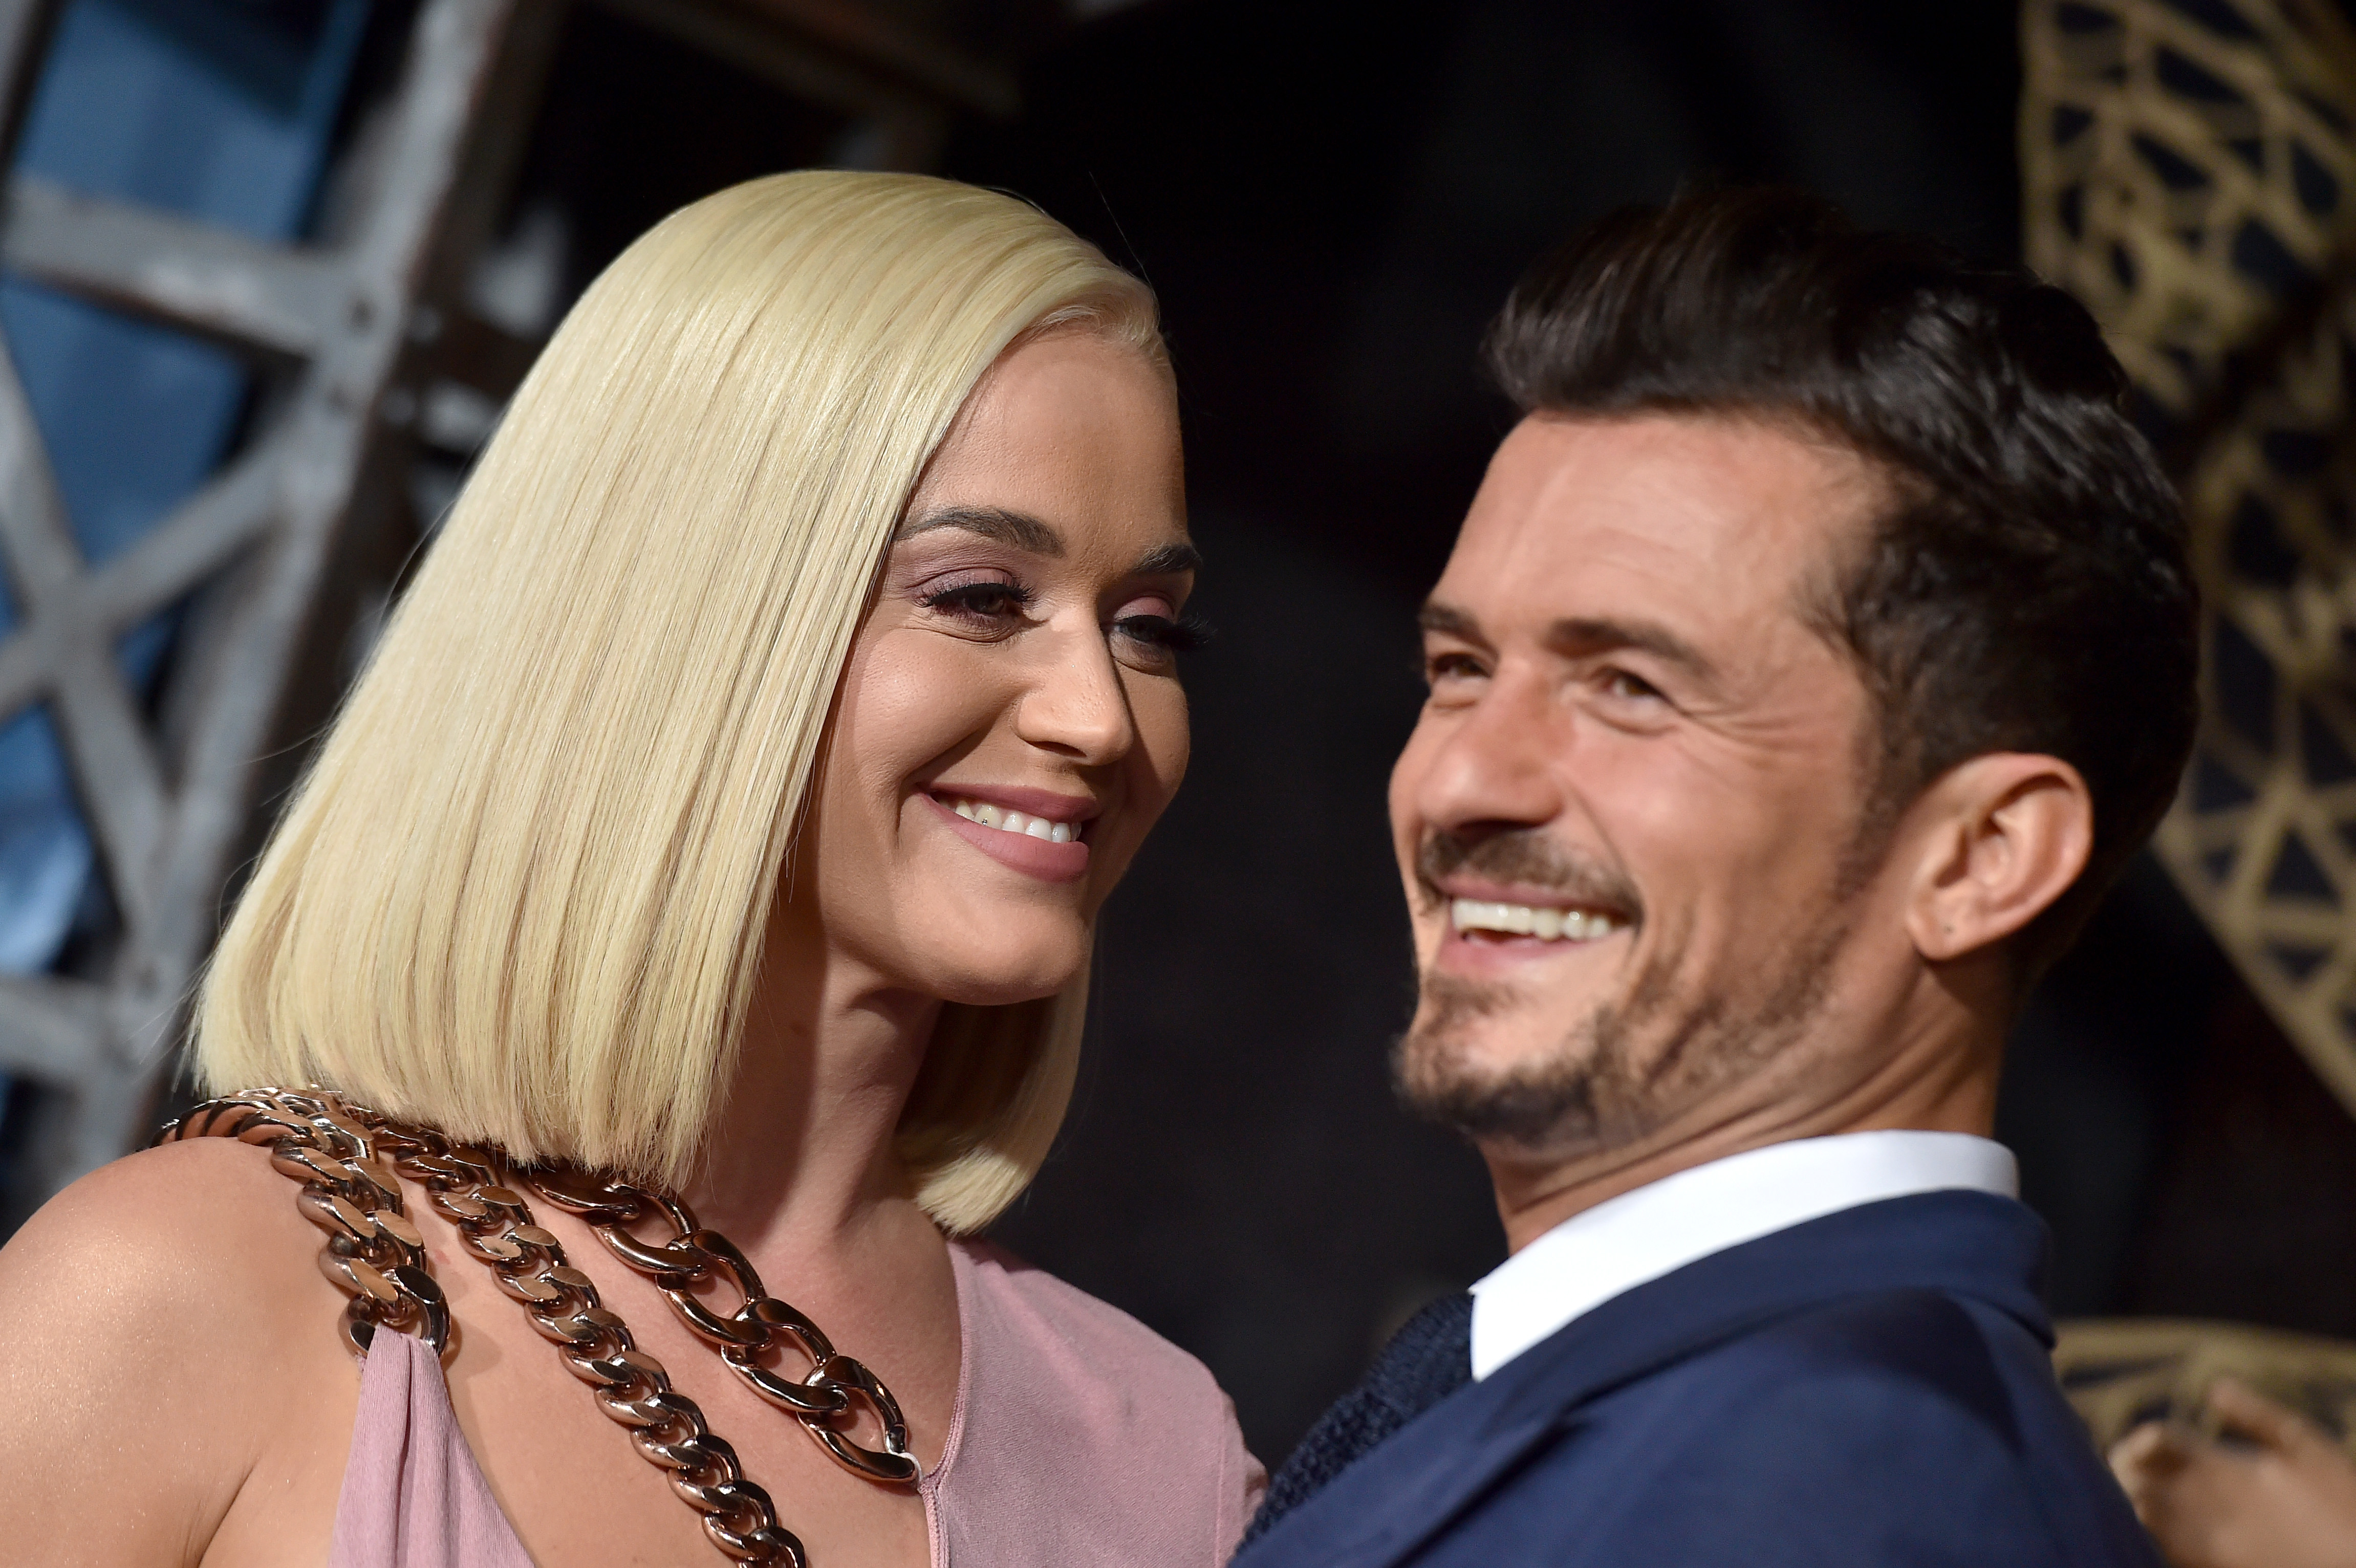 Katy Perry and Orlando Bloom at the premiere of "Carnival Row" in Hollywood, California on August 21, 2019 | Source: Getty Images